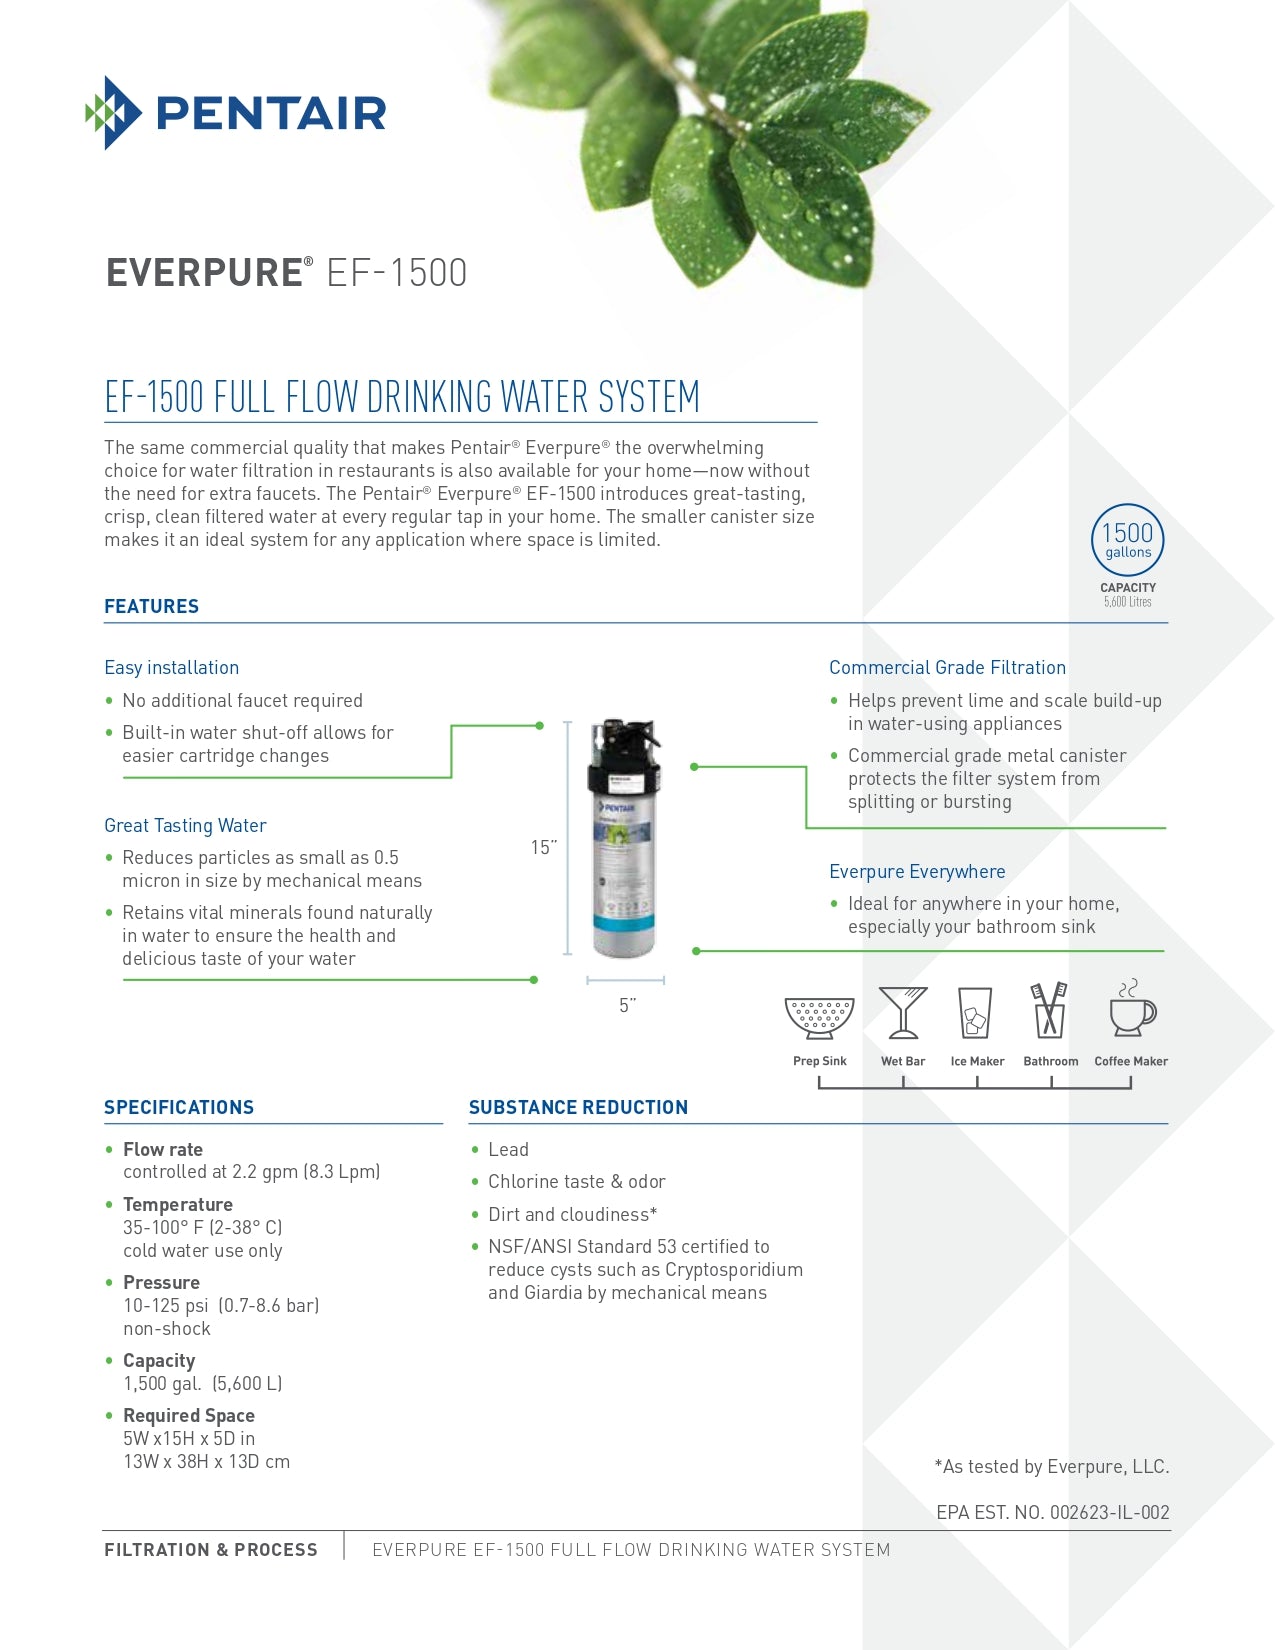 Everpure EF-1500 淨濾芯(連上門換芯服務 Filter Cartridge with on-site installation)